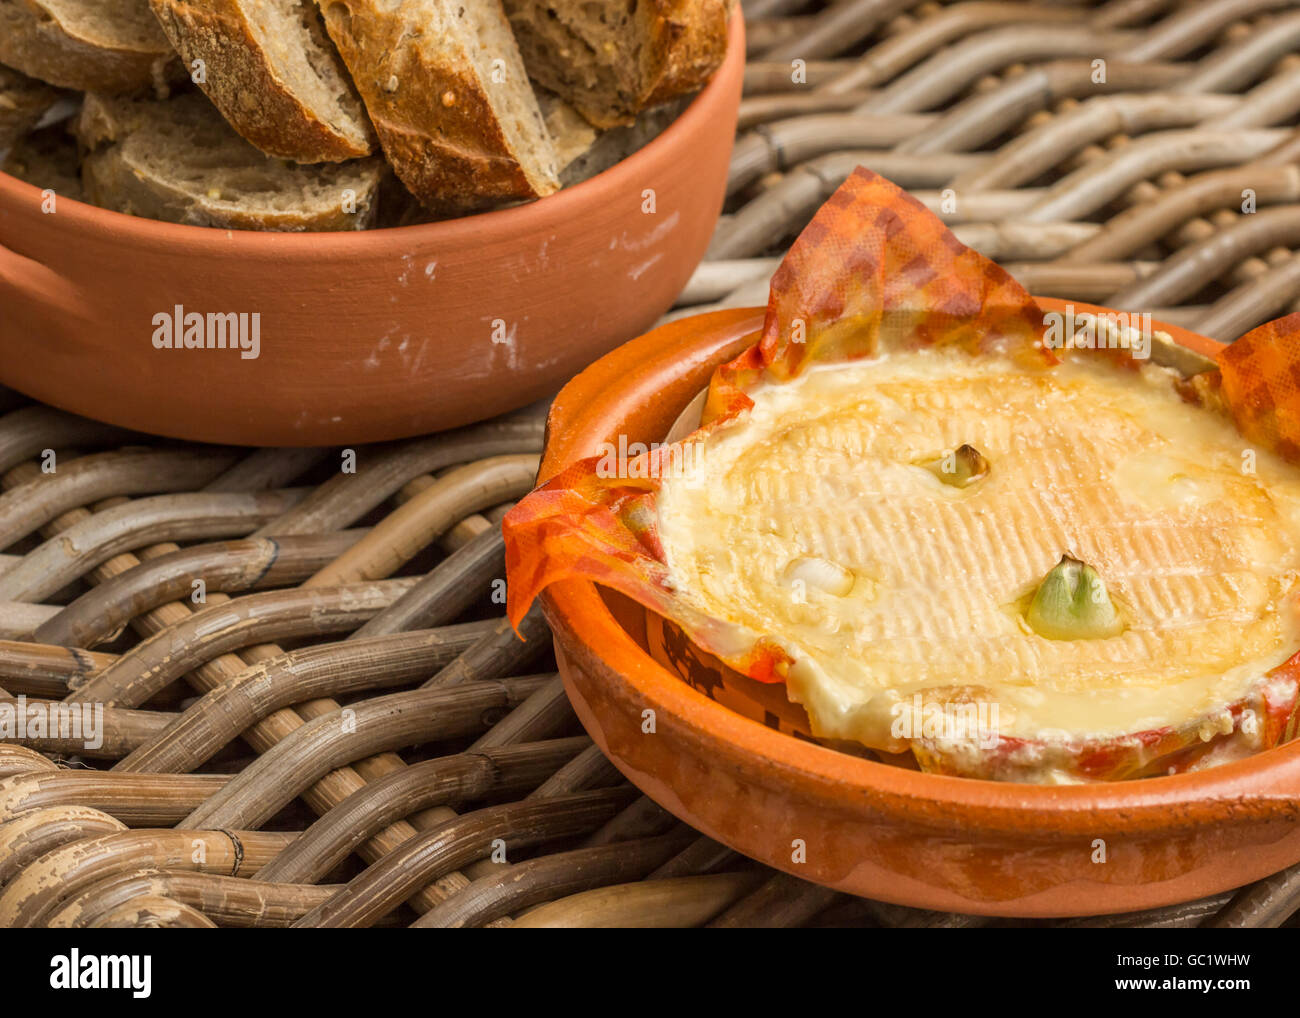 French camembert baked with garlic, served with bread Stock Photo